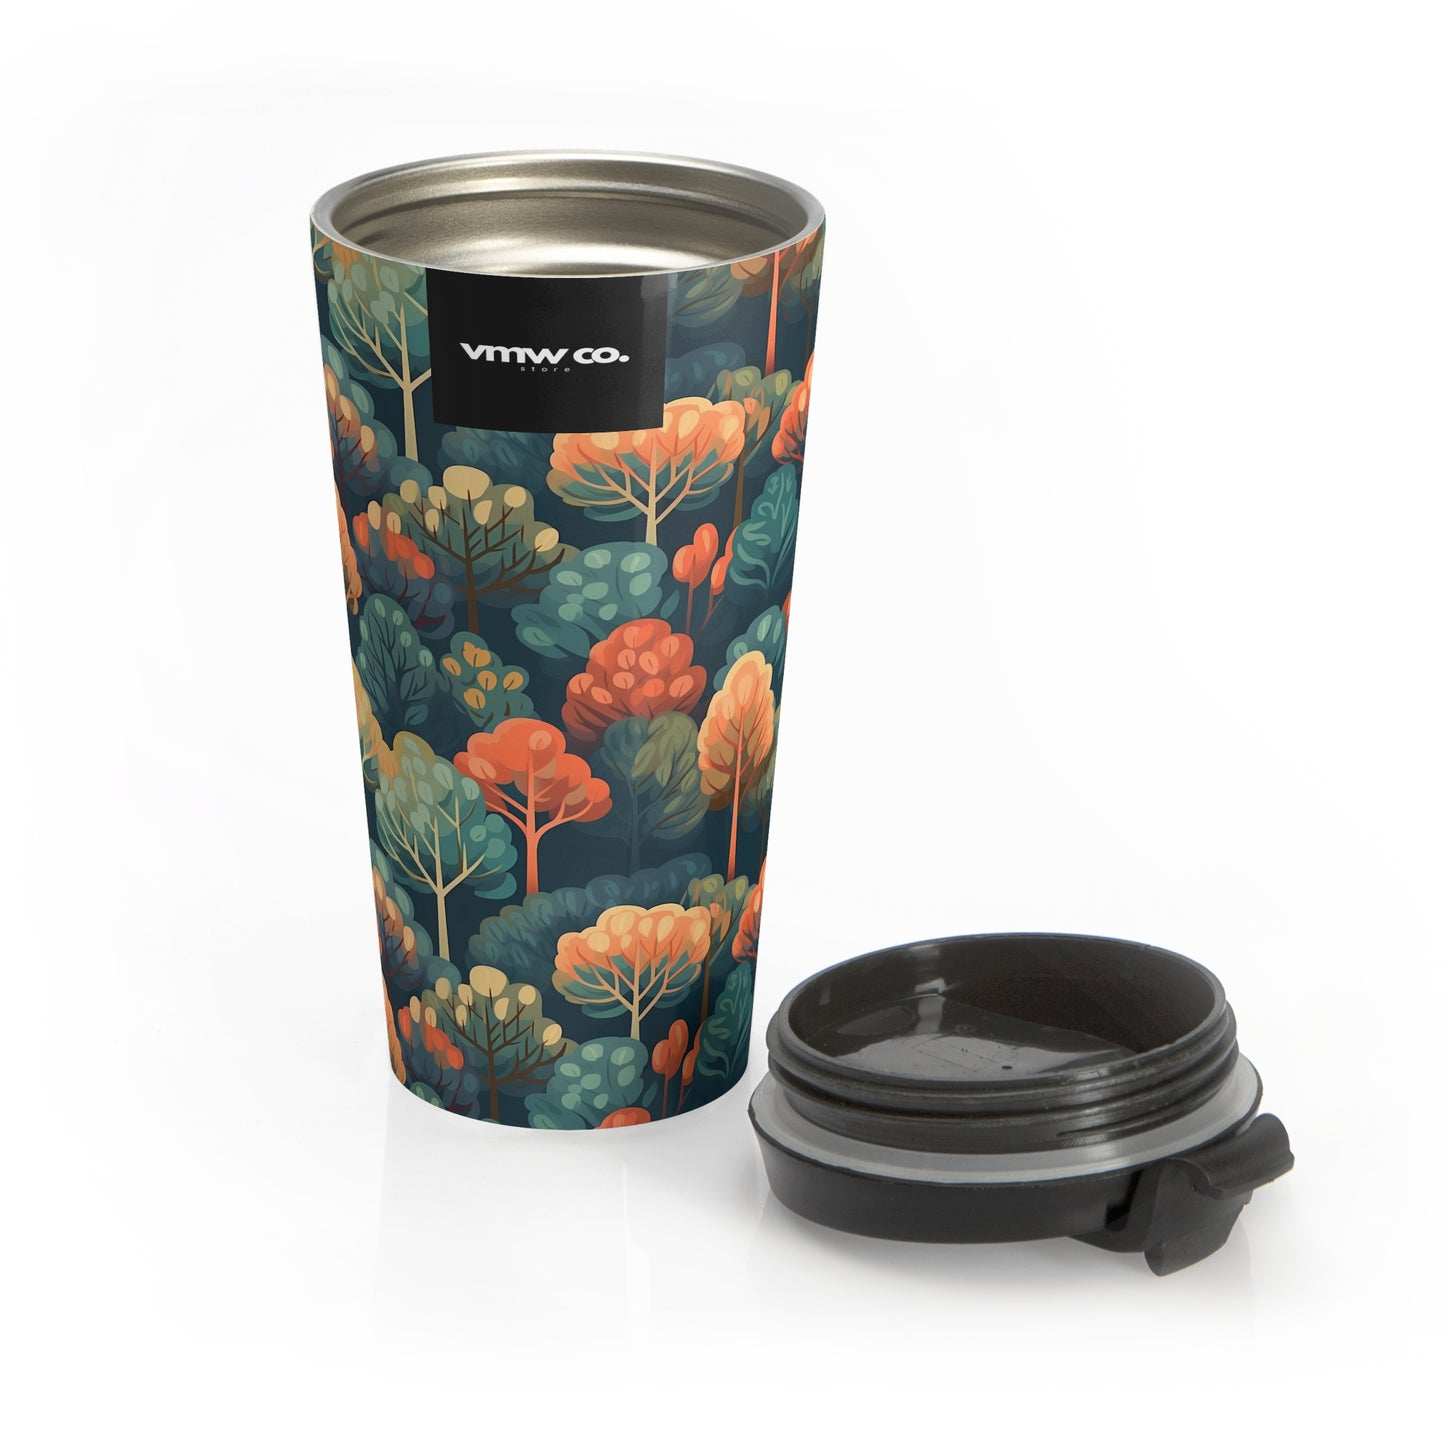 Fall Forest Stainless Steel Travel Mug